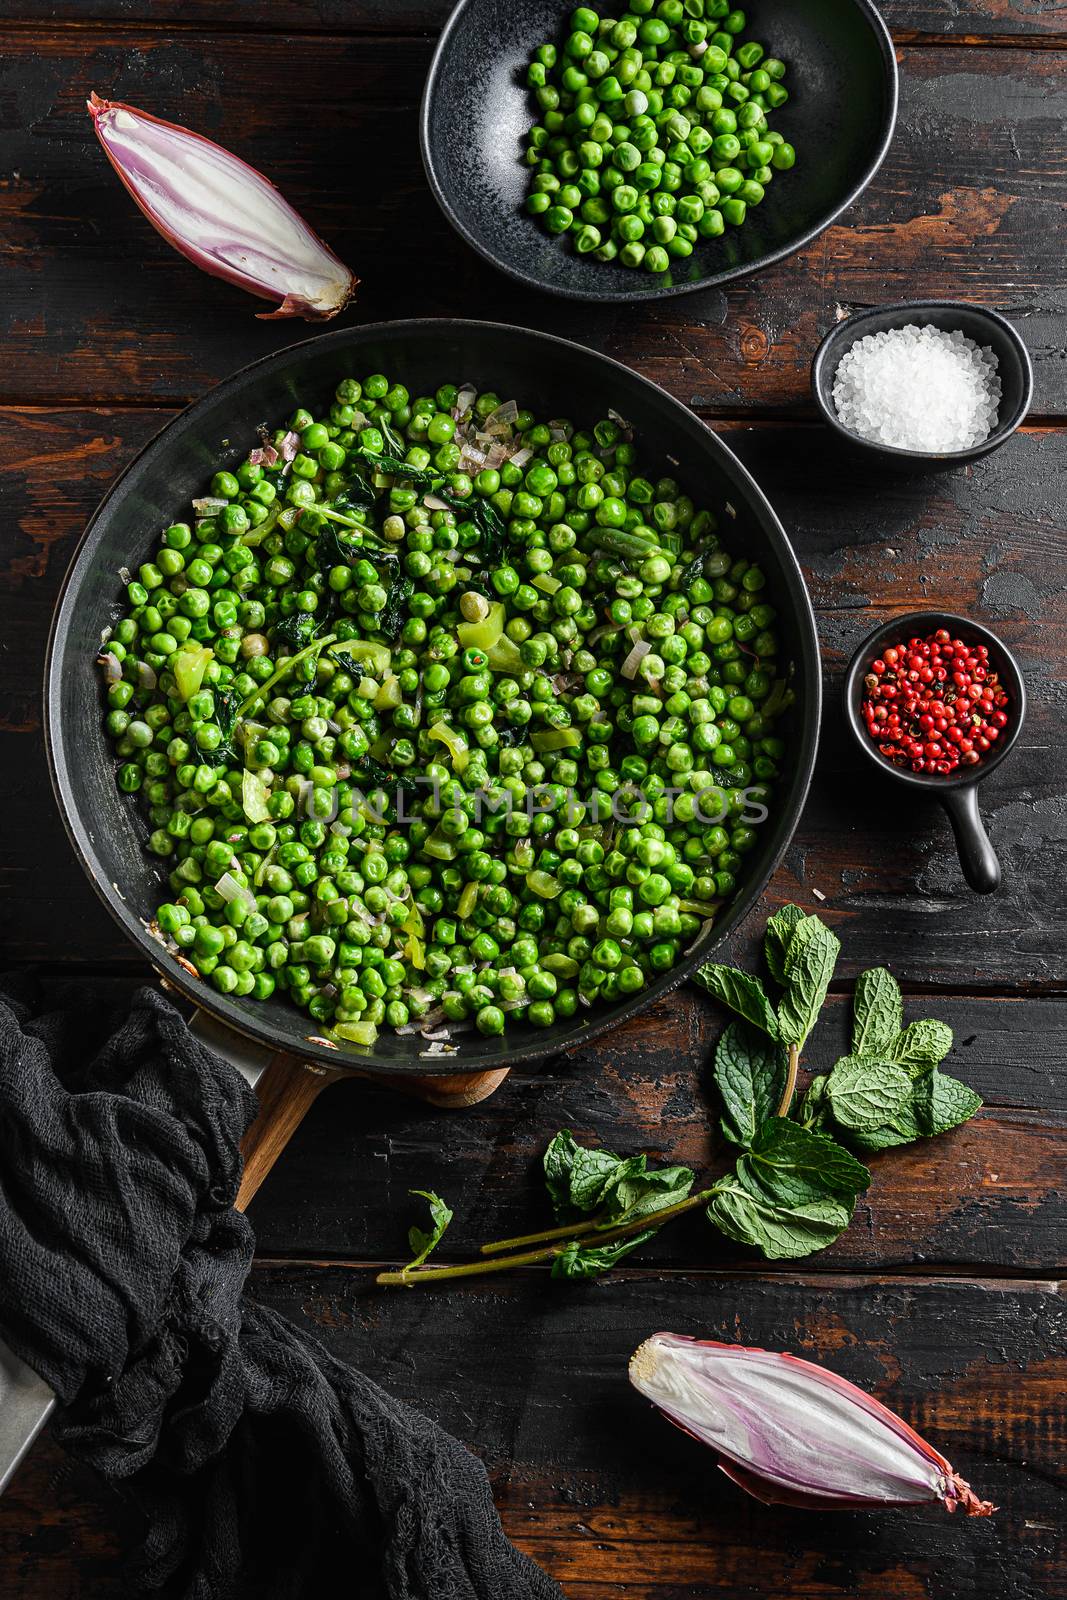 English mushy peas recipe in frying pan and peas in bowl with mint shallot pepper and salt top overhead view over old pub wood surface close up vertical.